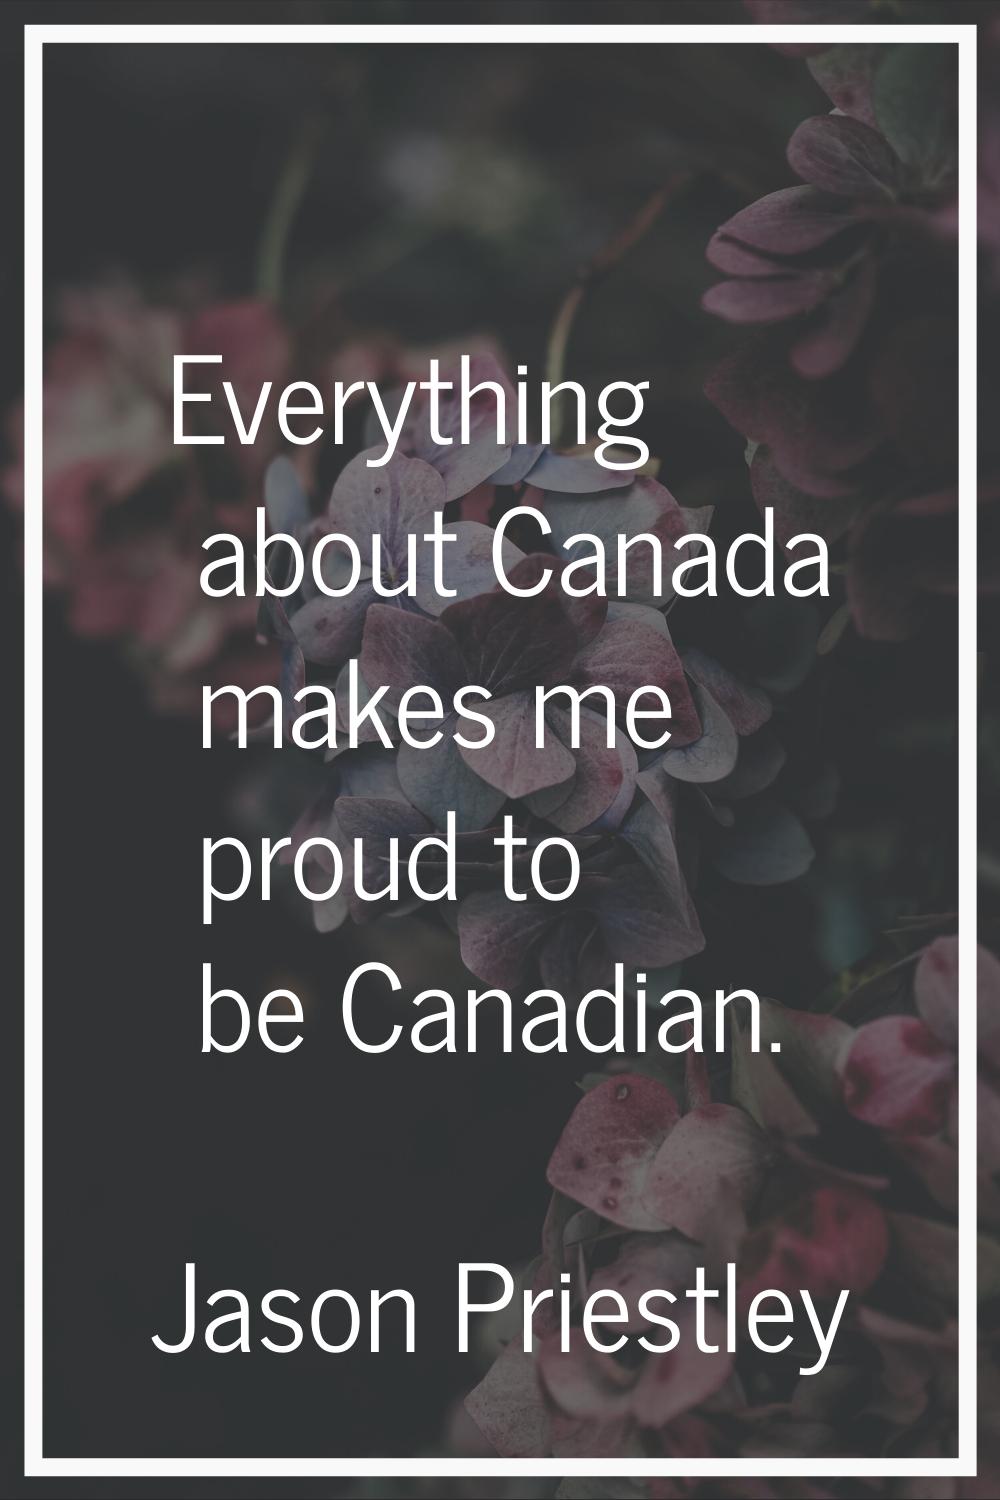 Everything about Canada makes me proud to be Canadian.